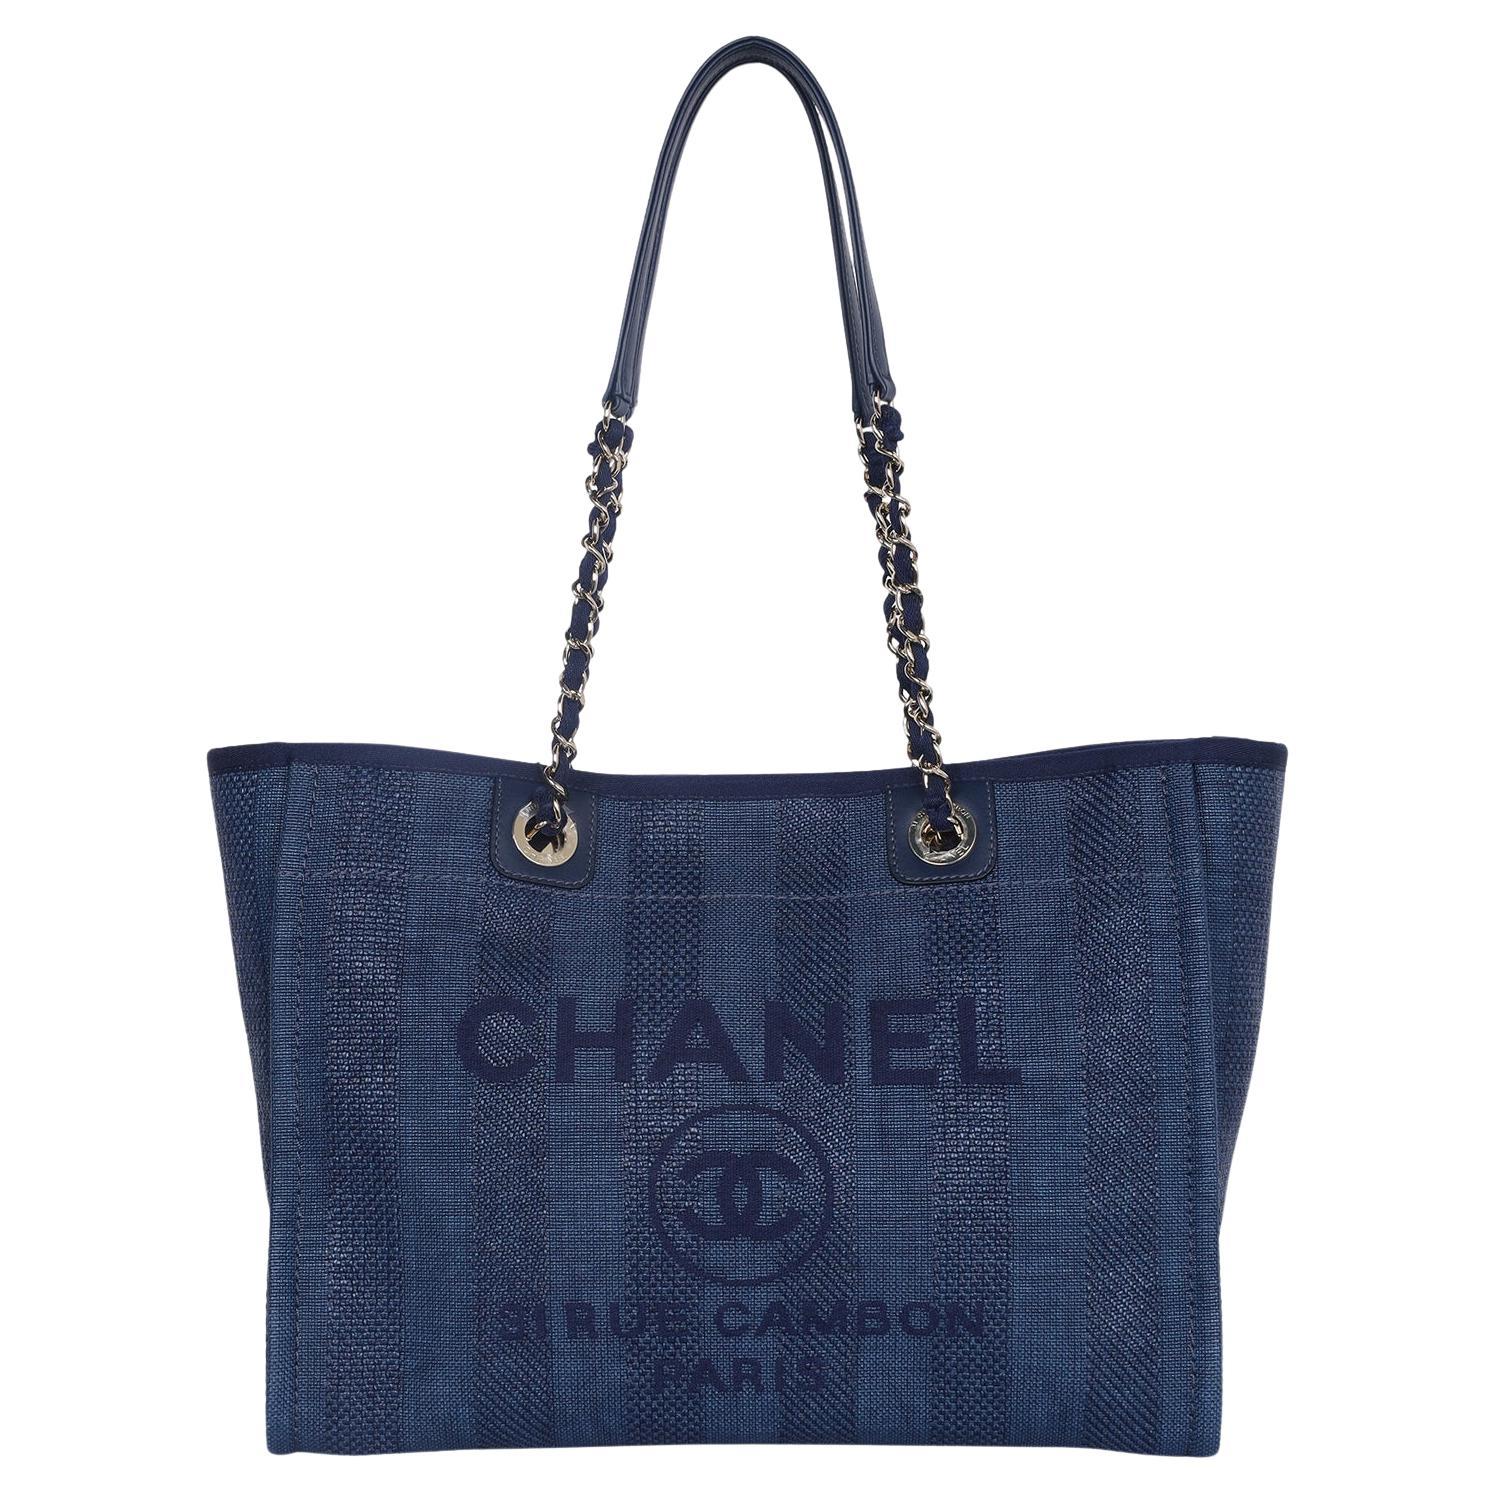 Authentic, NEW with tags Chanel Deauville navy blue stripe shoulder bag tote. This beautiful tote features fine woven mixed fibers with a blue Chanel advertisement logo embroidered detail. The shoulder bag features polished gold chain link fabric